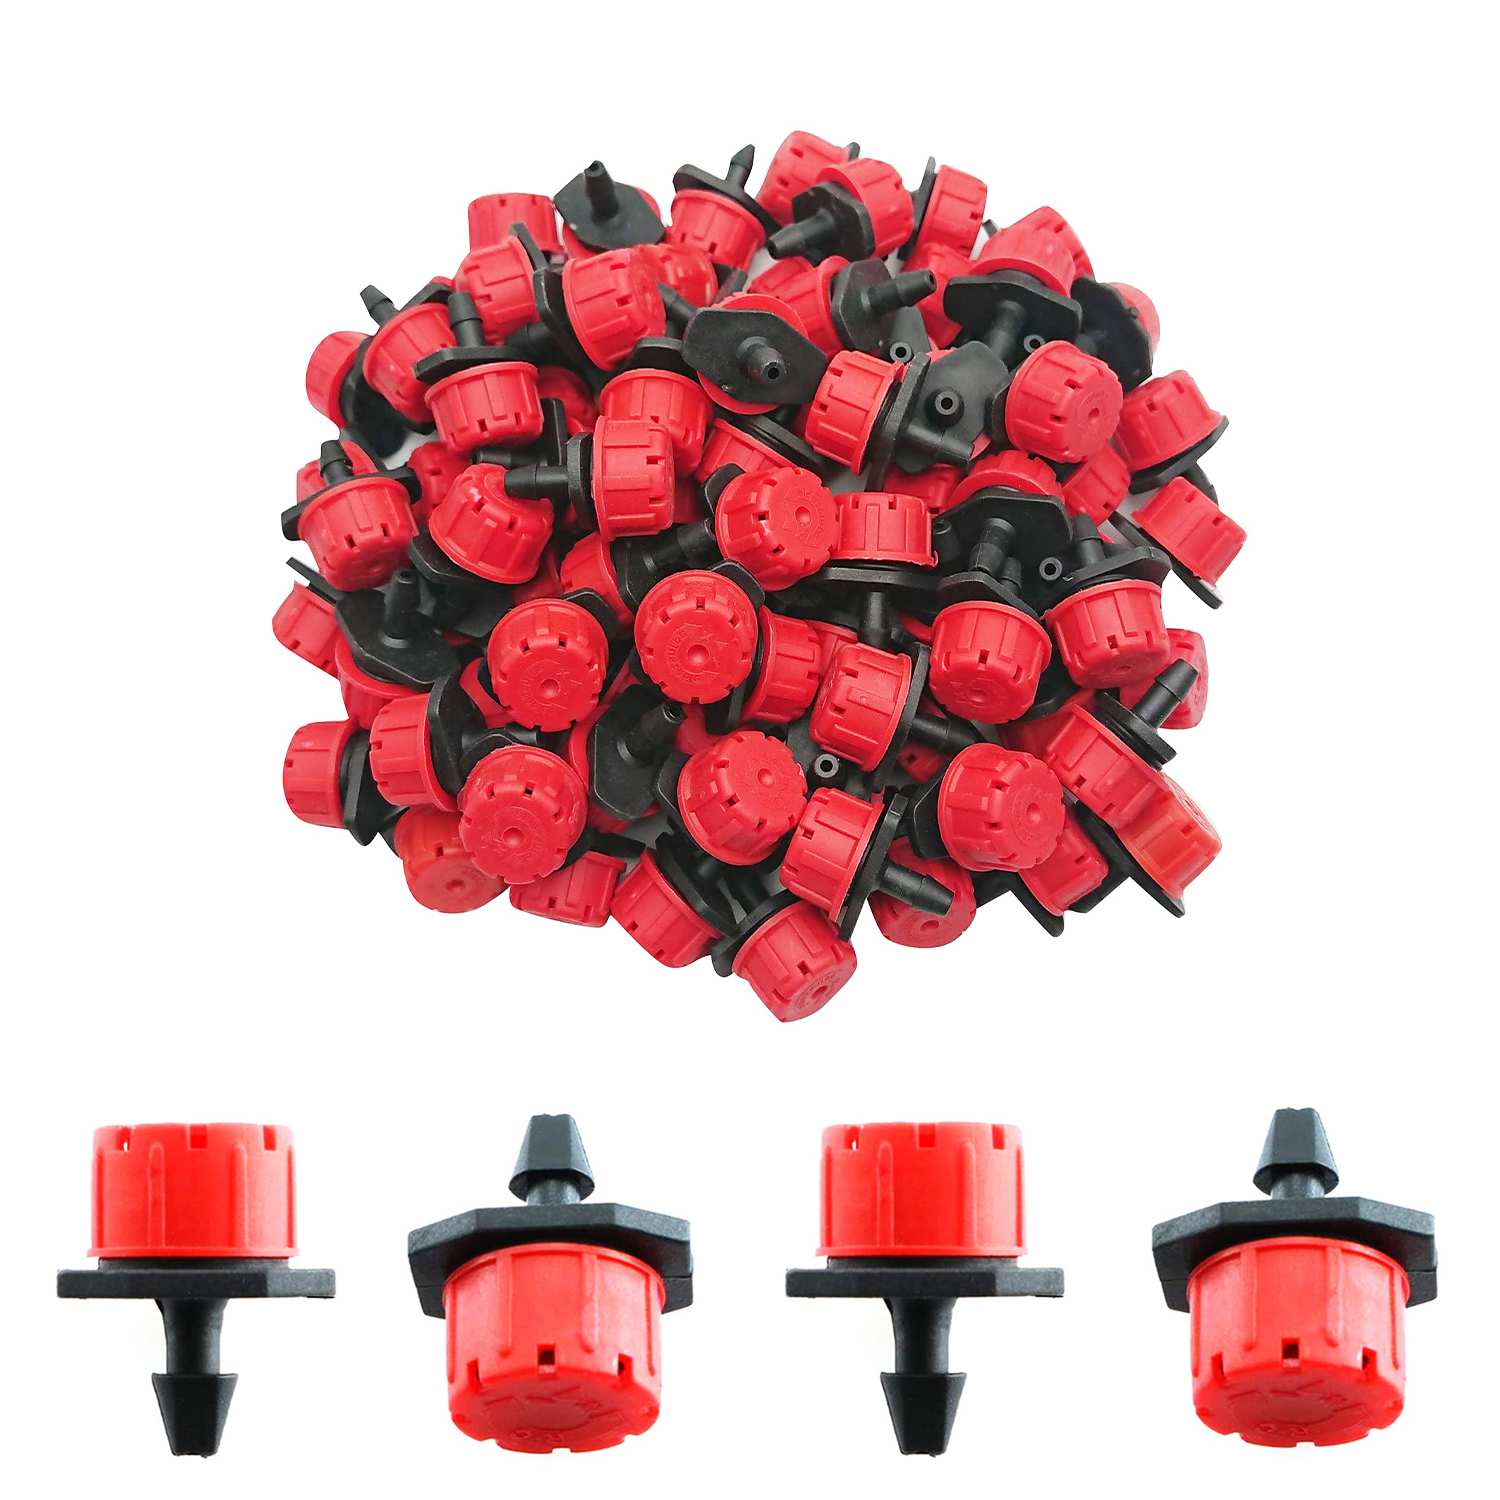 Xloey 360 Degree Adjustable Irrigation Drippers Sprinklers 100pcs 1/4 Inch Emitters Drip for Watering System